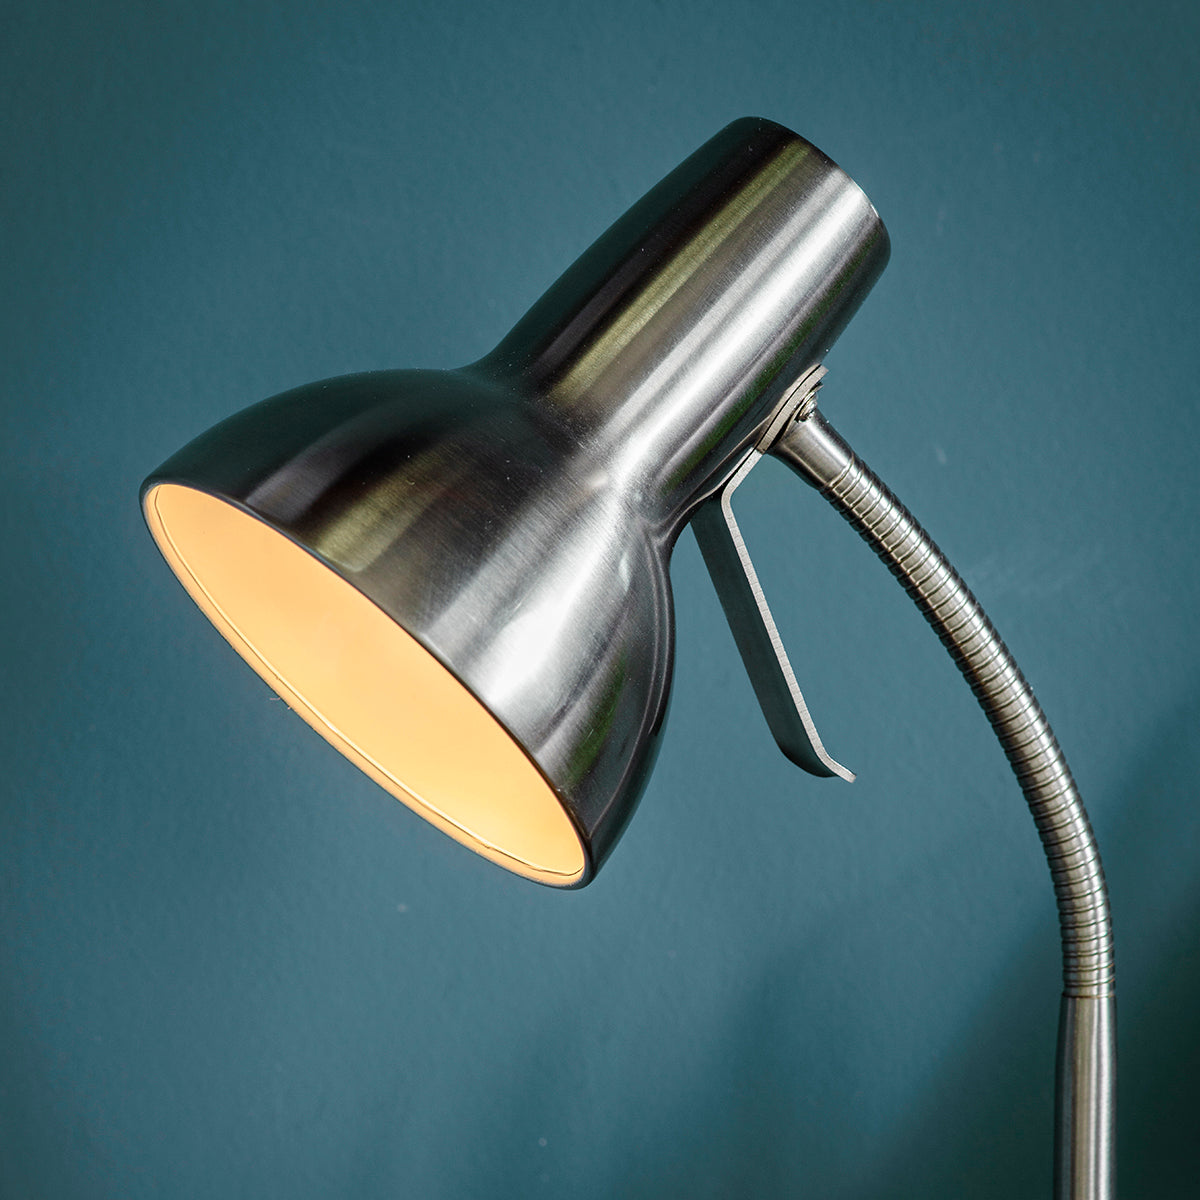 A Bickerton Floor Lamp Nickel by Kikiathome.co.uk adding to the interior decor of a blue wall.